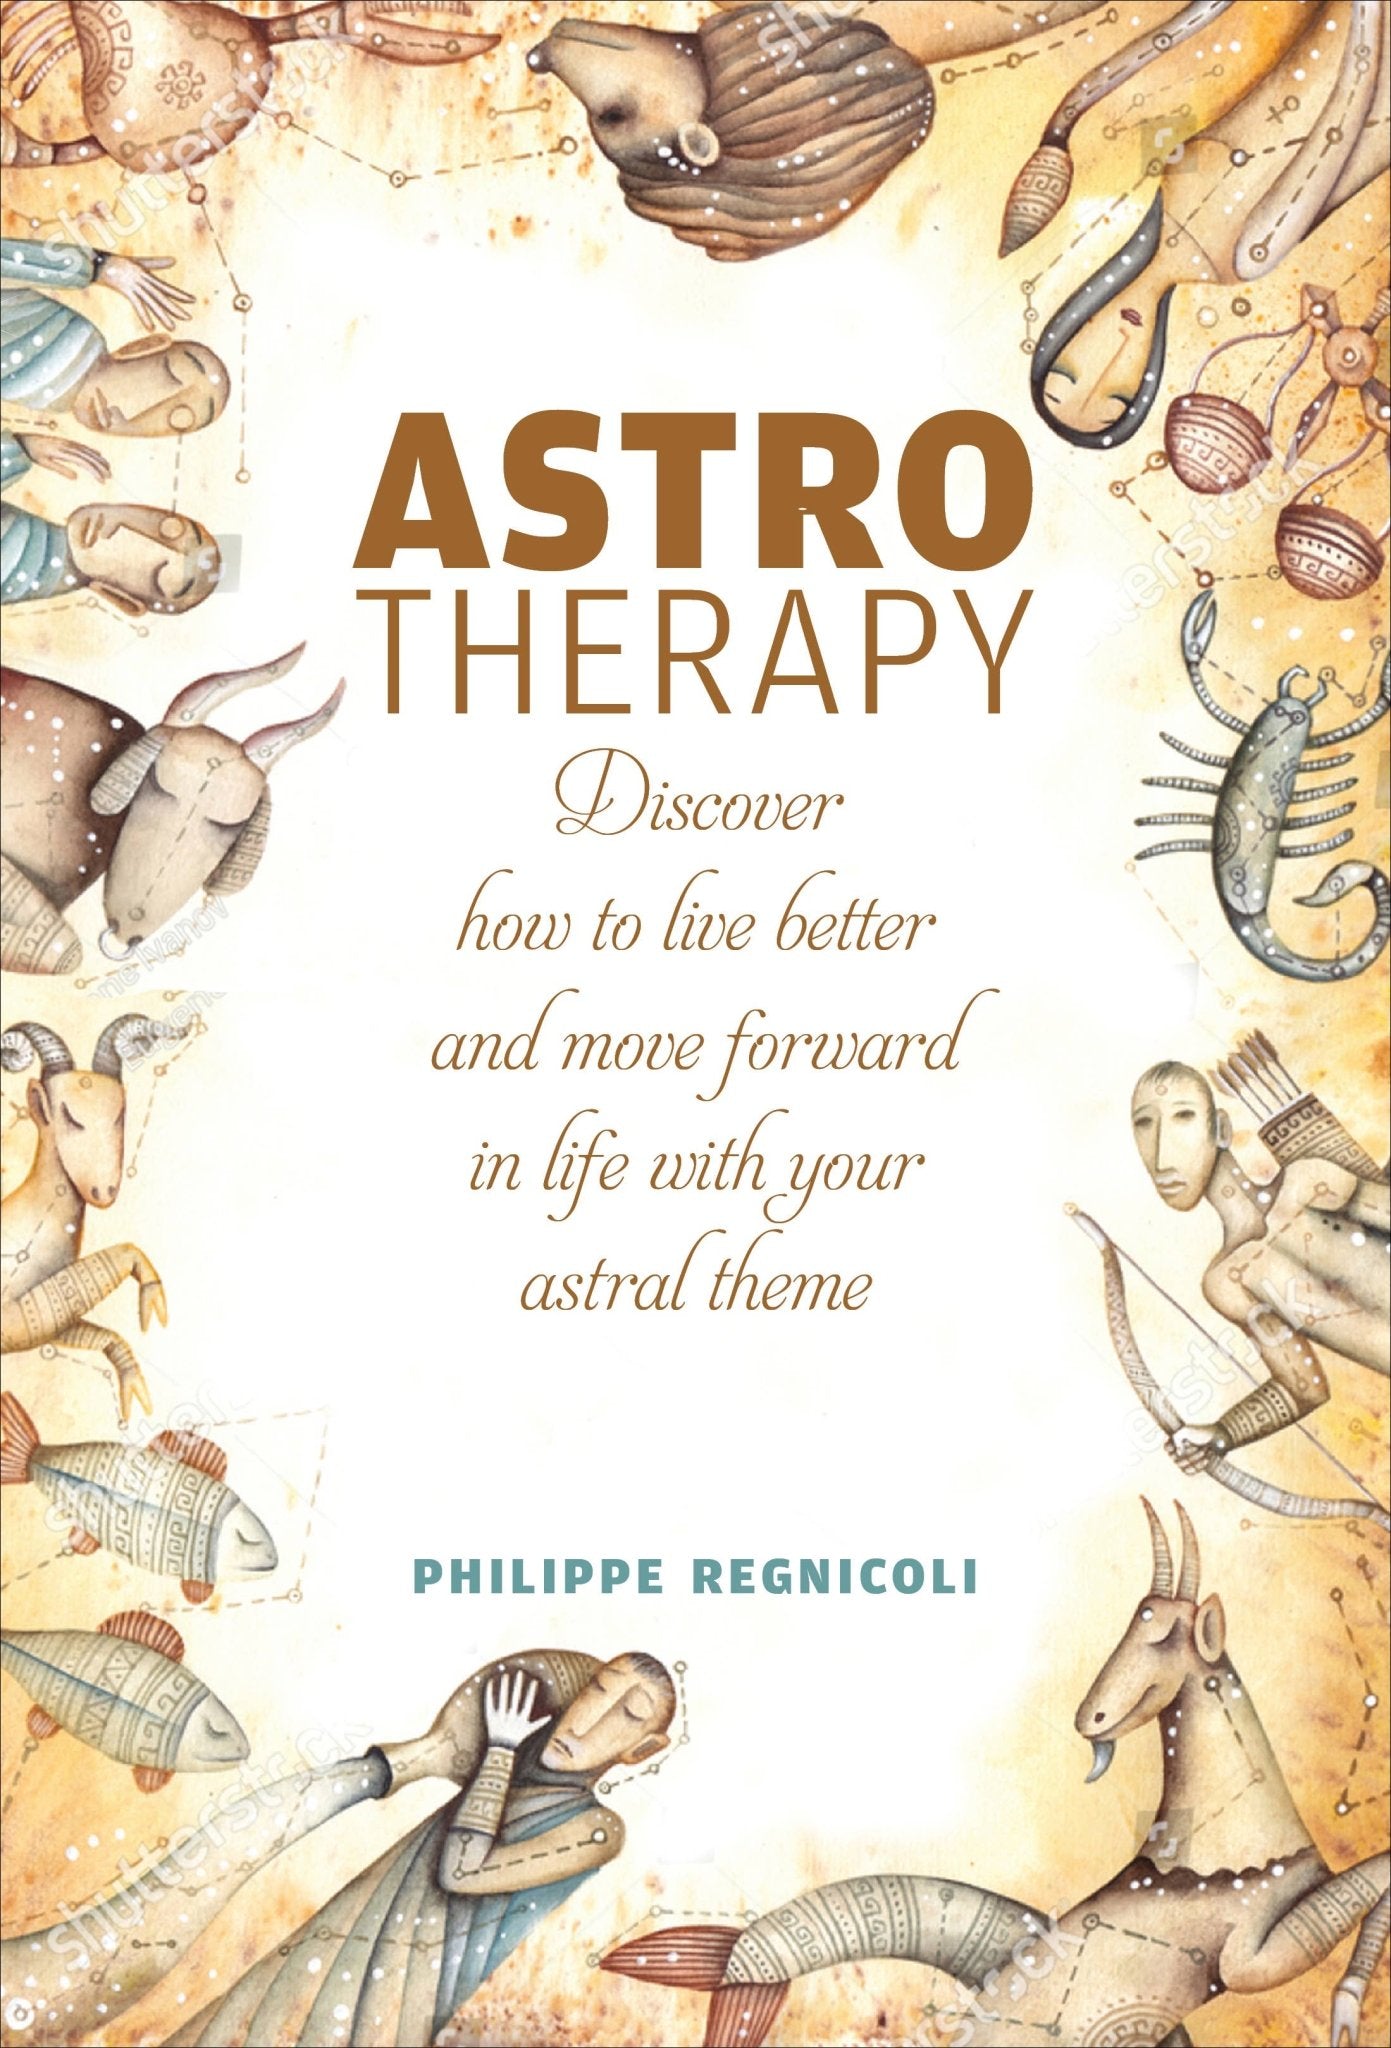 Astrotherapy: Discover How to Live Better and Move Forward - Spiral Circle